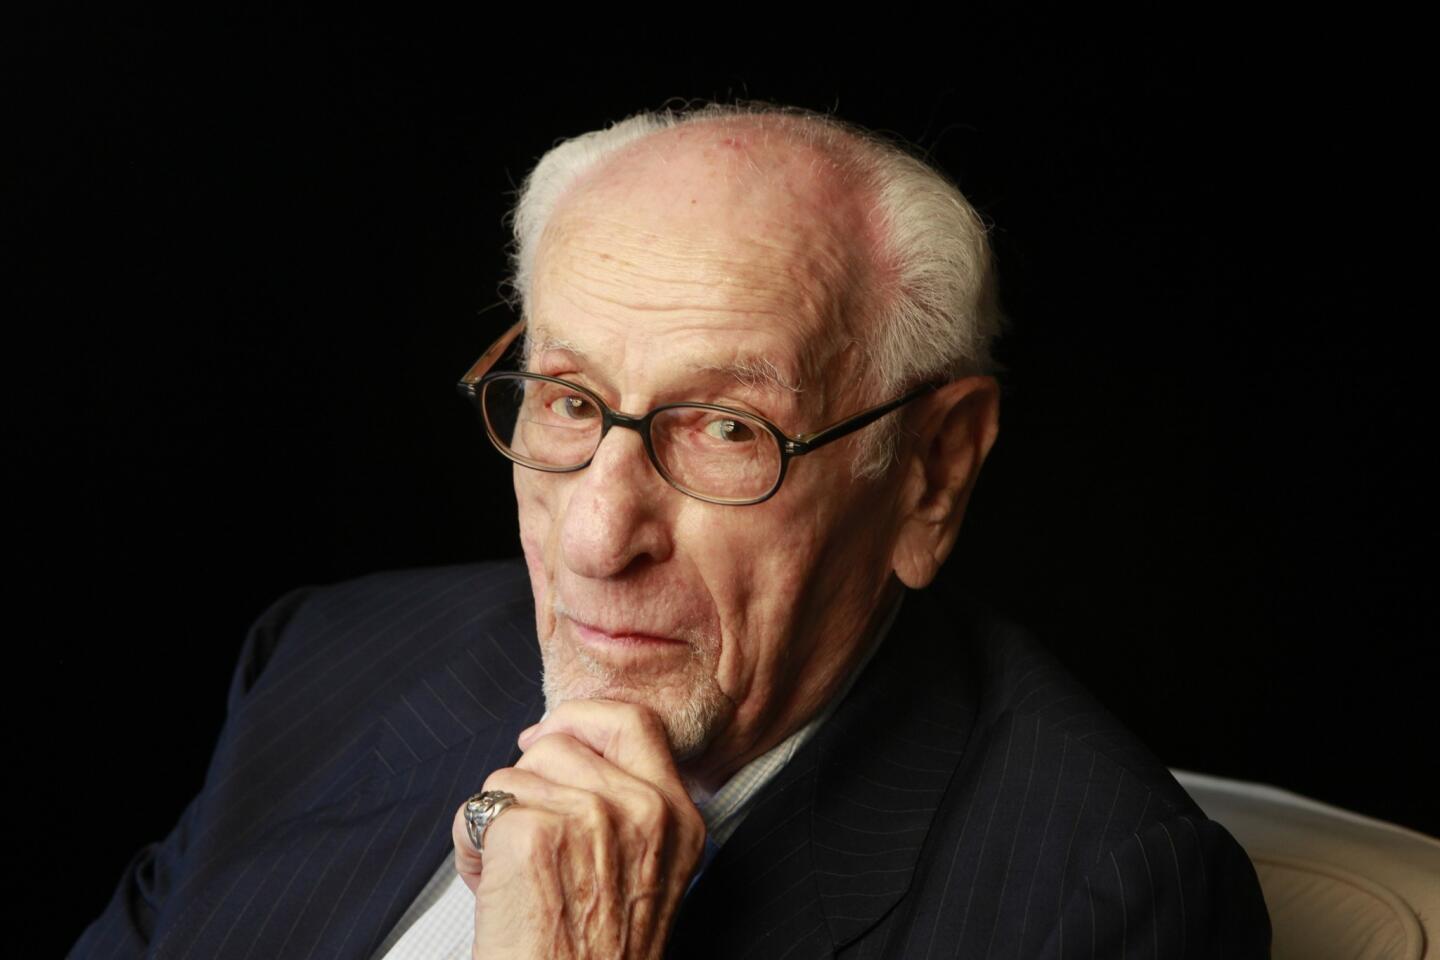 Actor Eli Wallach in October 2010 in New York. He grew up in the tough Red Hook section of Brooklyn with a desire to act.